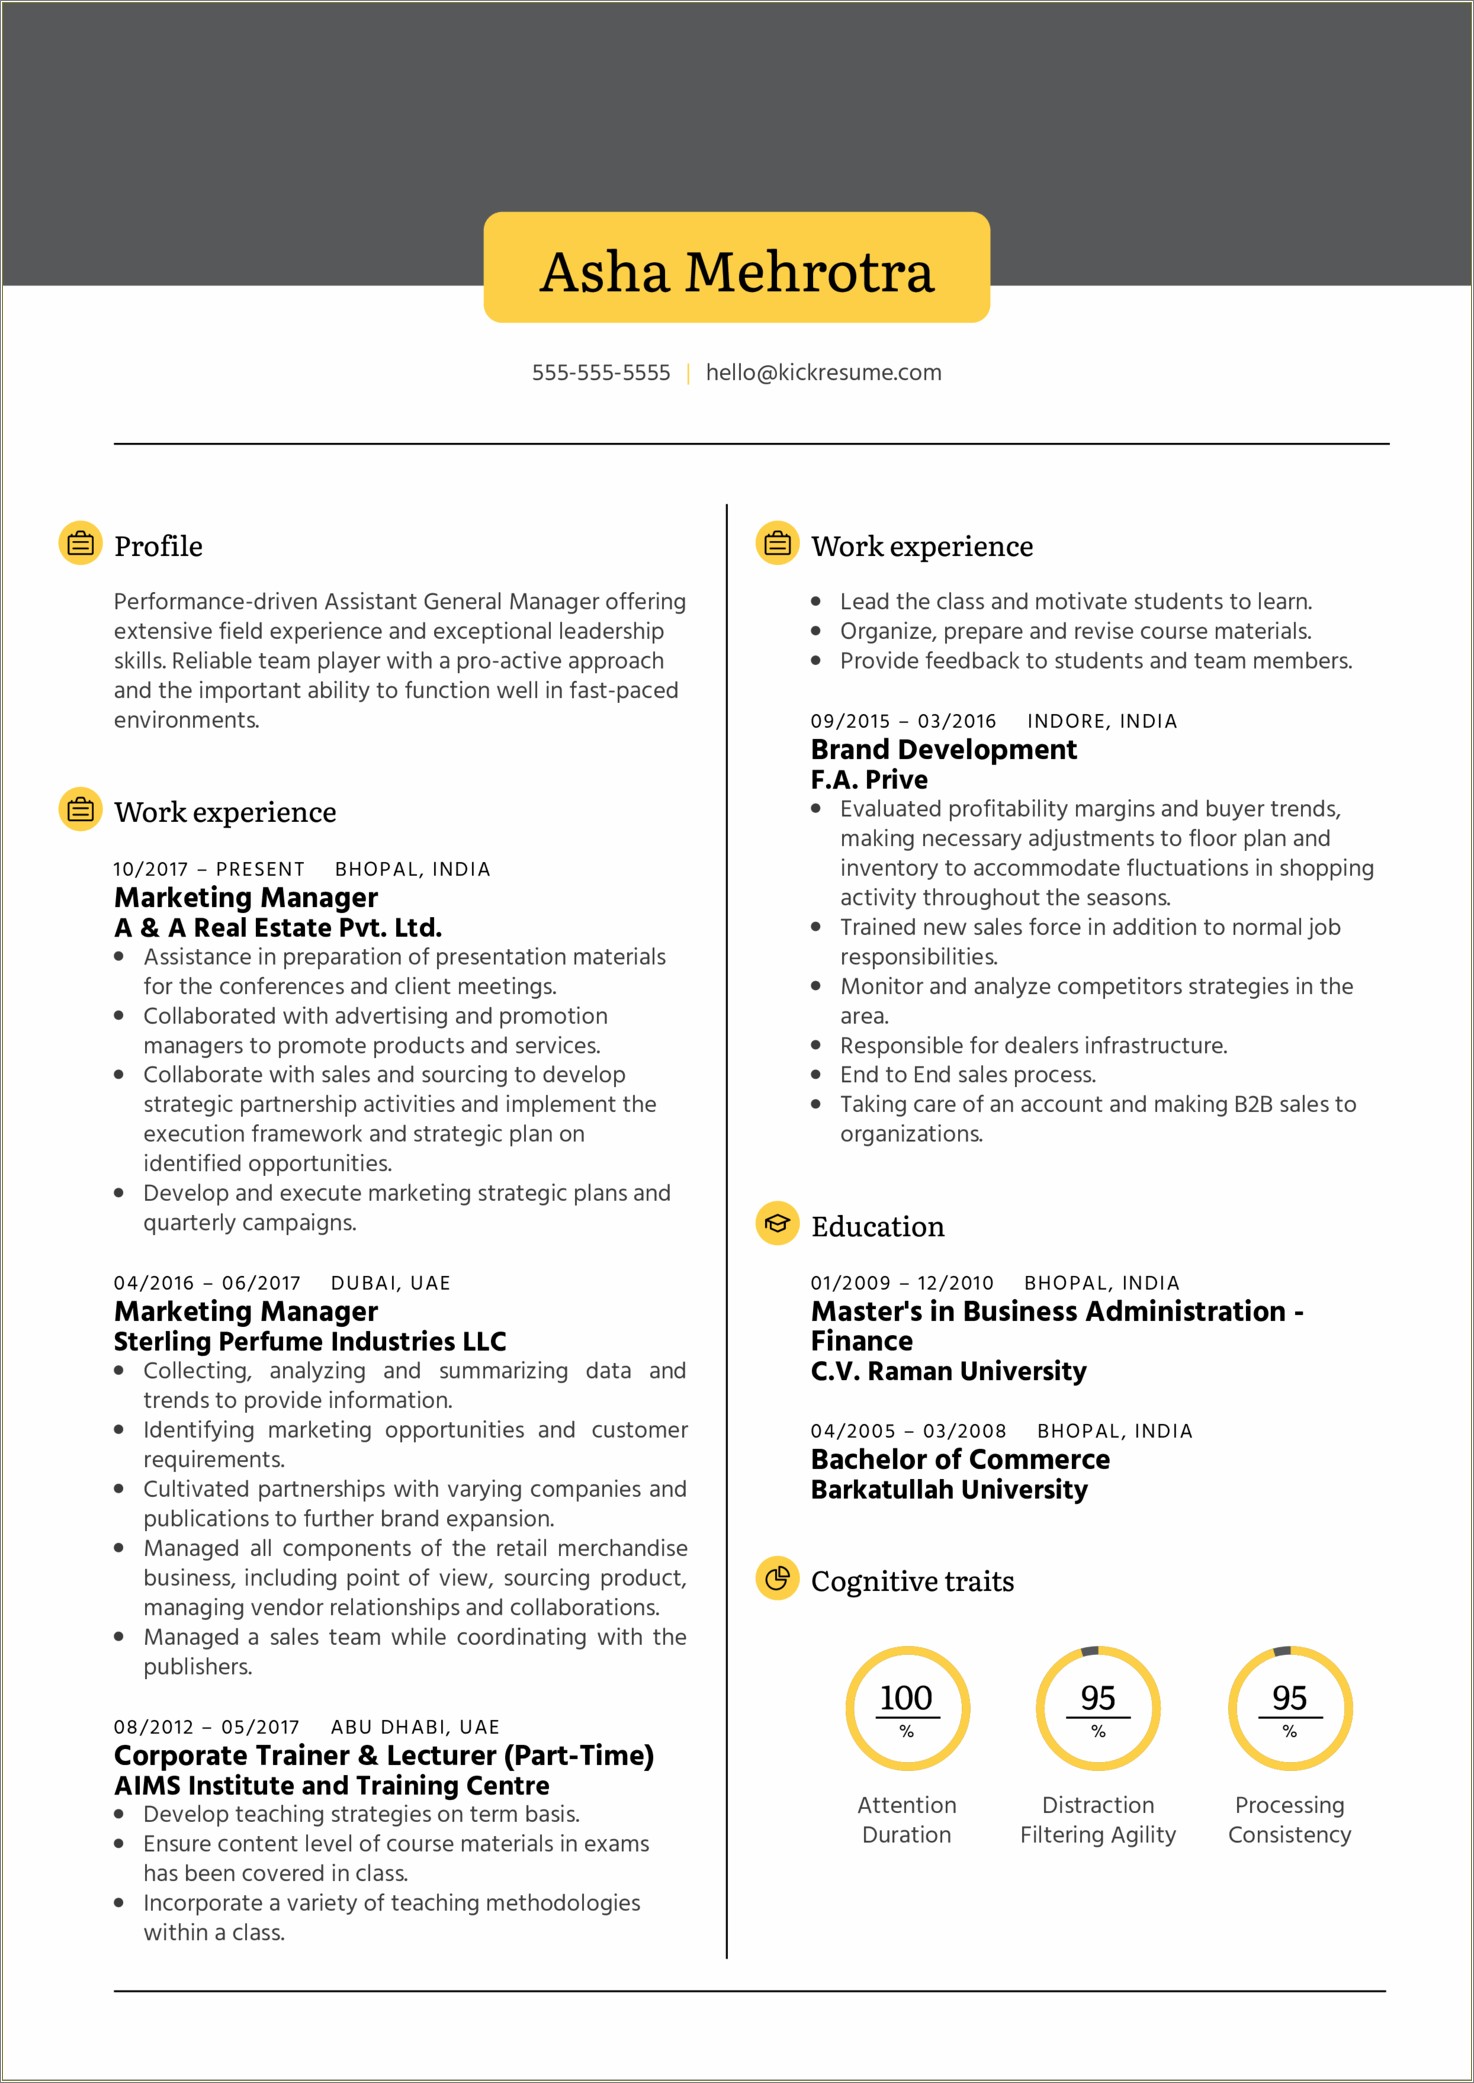 Managed Supplier Lifecycle Strategic Sourcing Resume